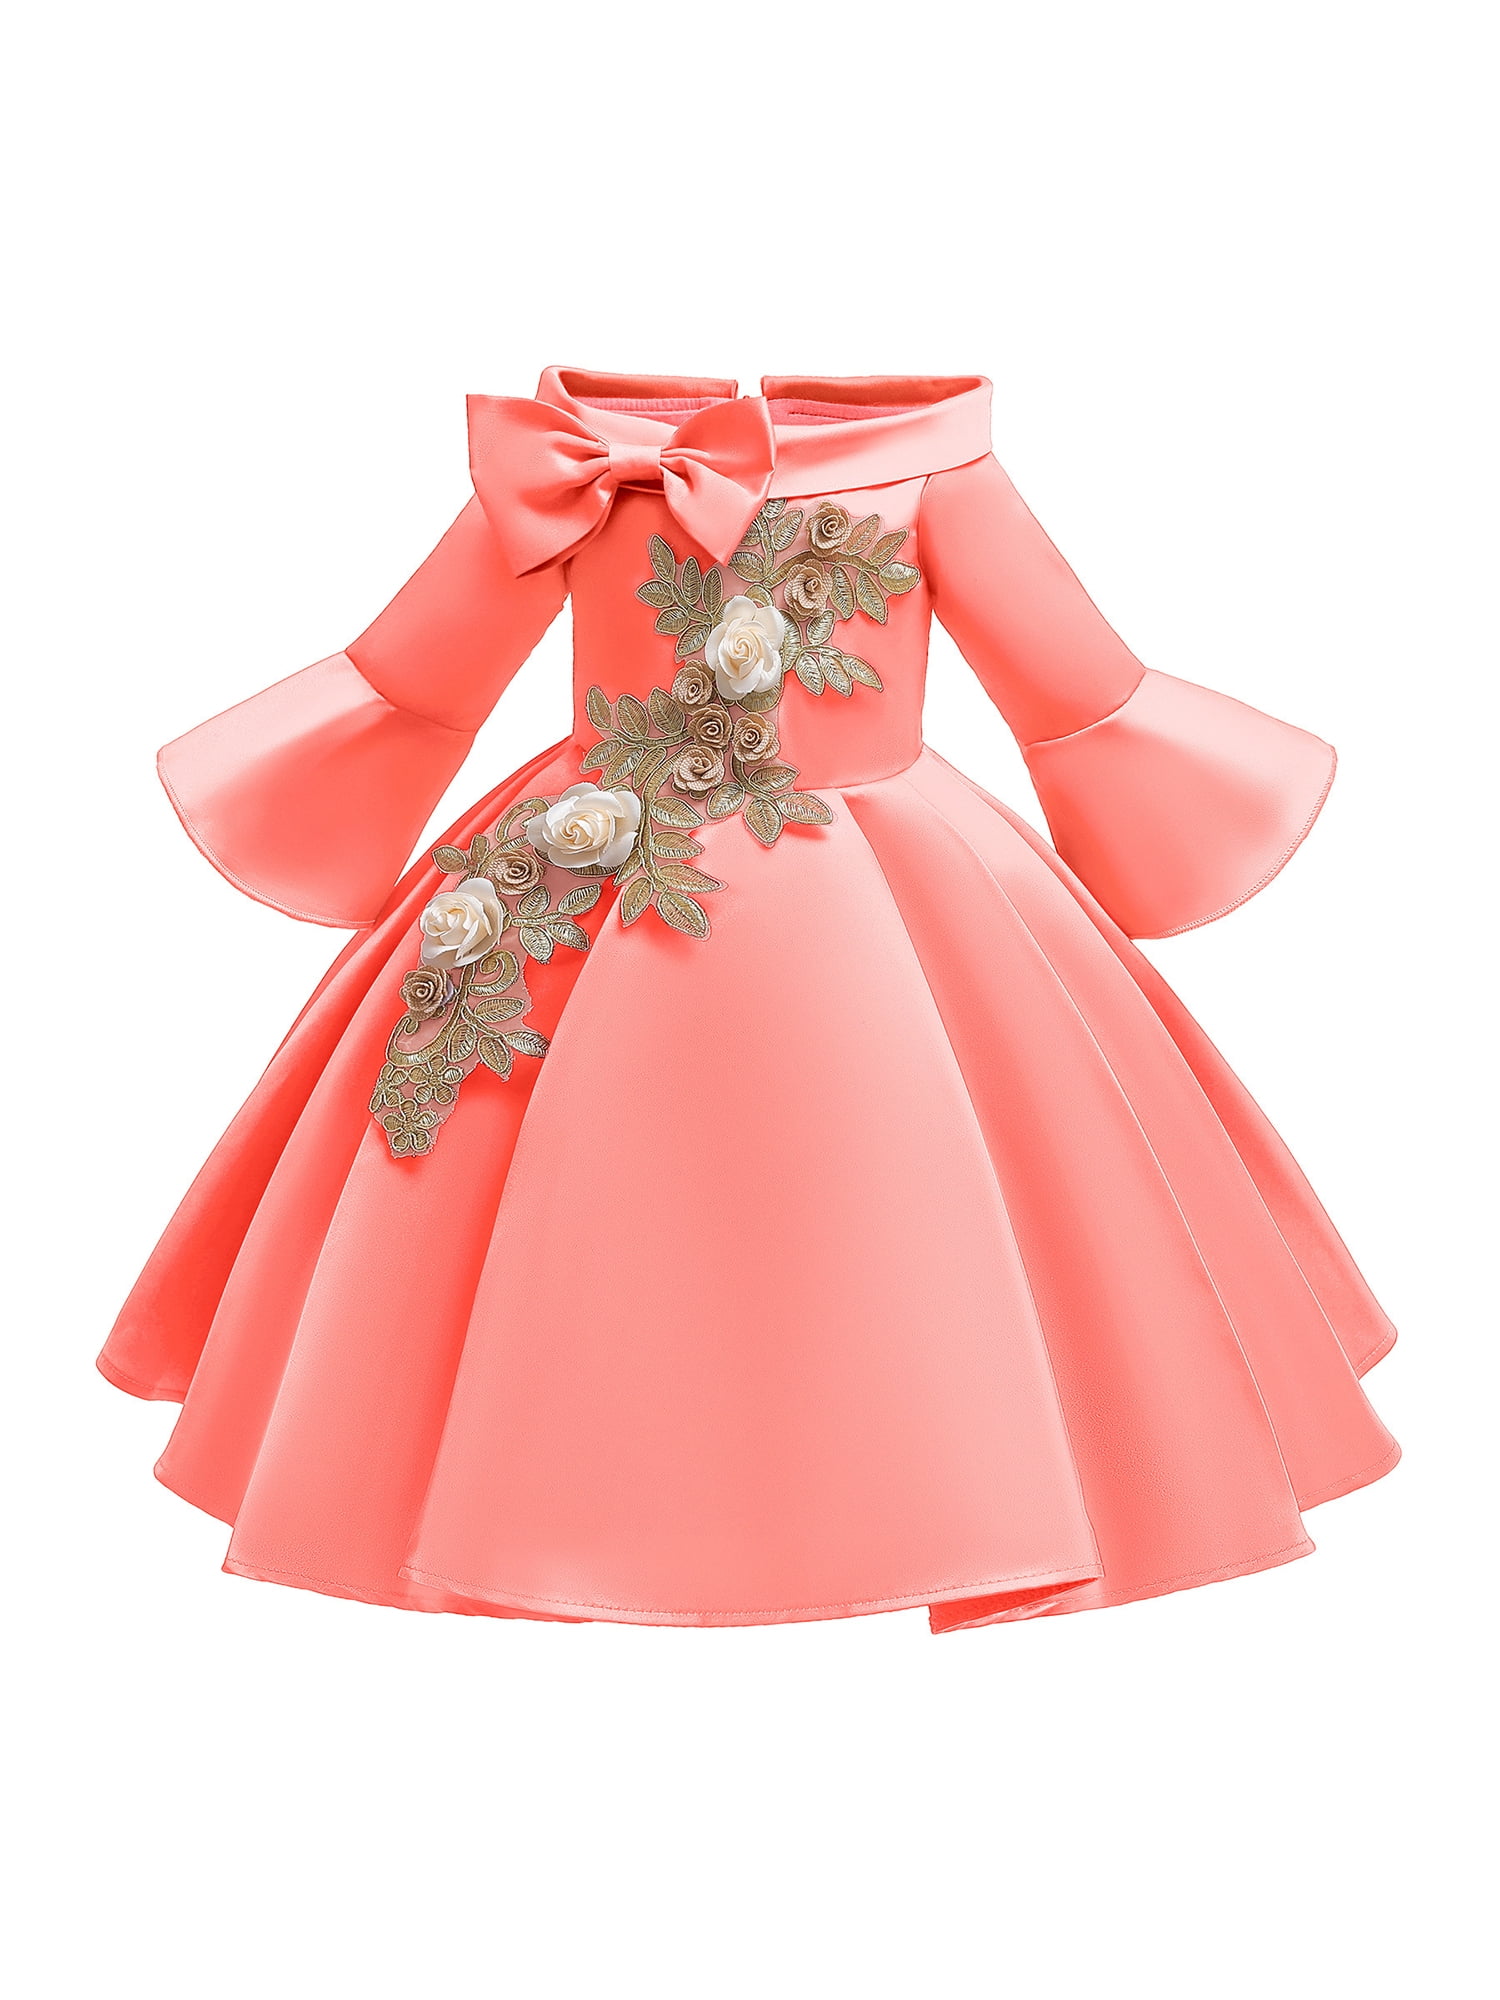 Girl's Flower Princess Dresses Party Evening Gown Kid Bowknot Dress Xmas Gift 